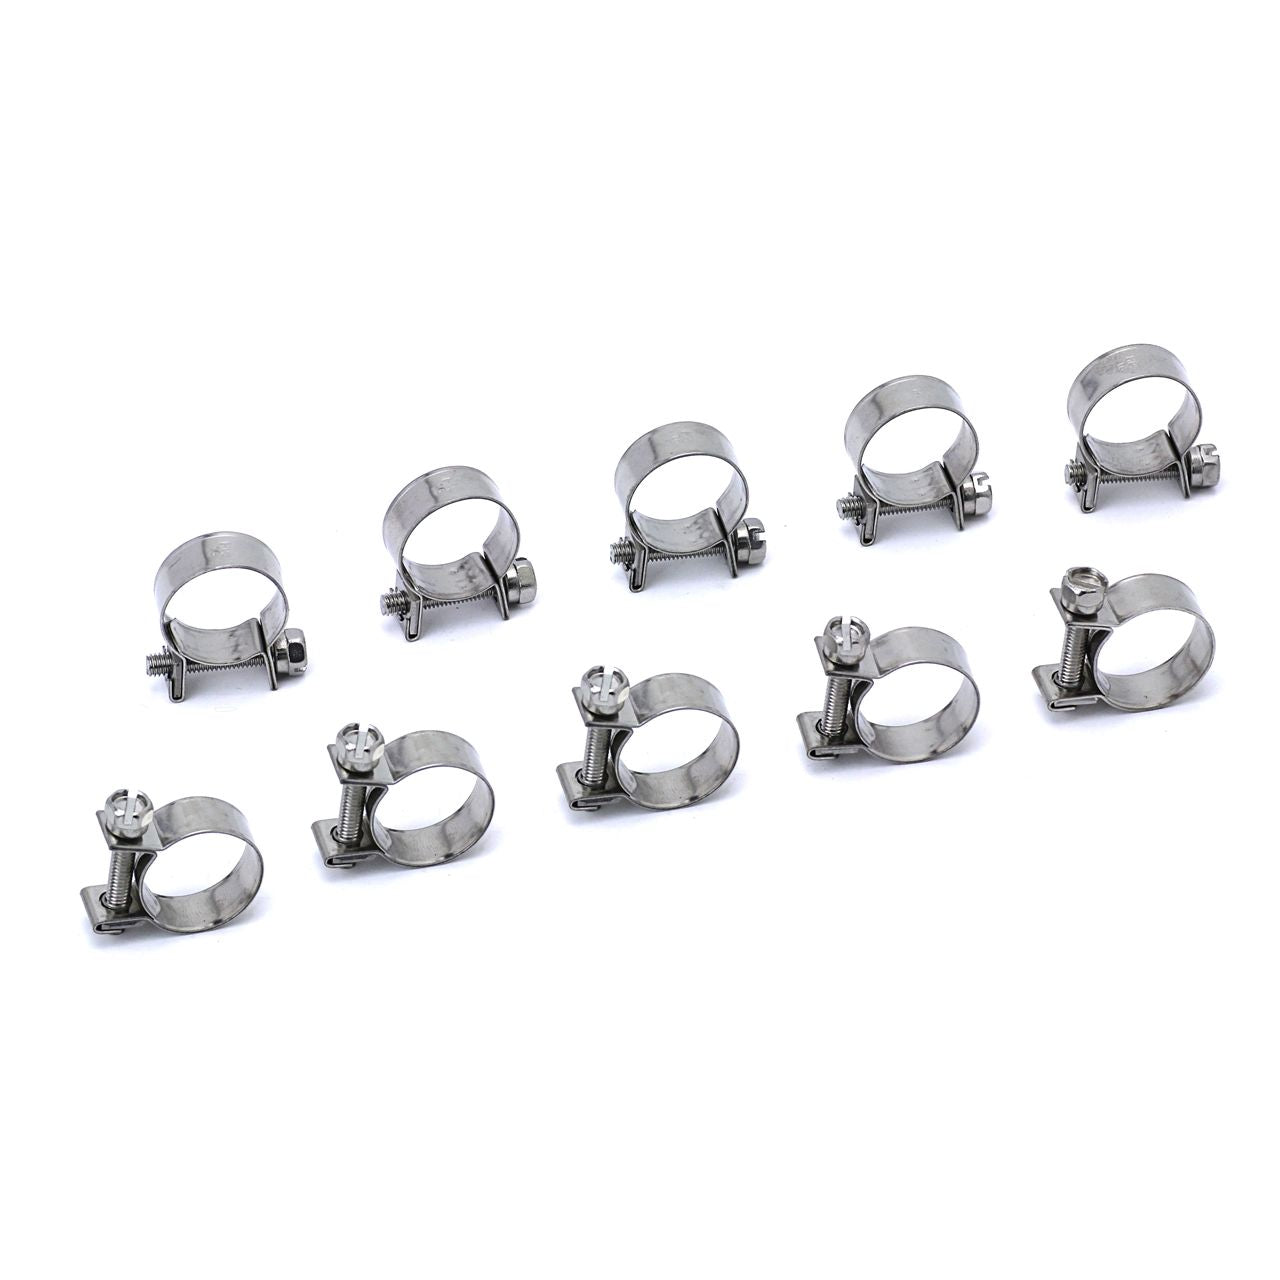 HPS #13 Stainless Steel 1/4" Fuel Injection Hose Clamps 10pc Pack (11mm - 13mm)